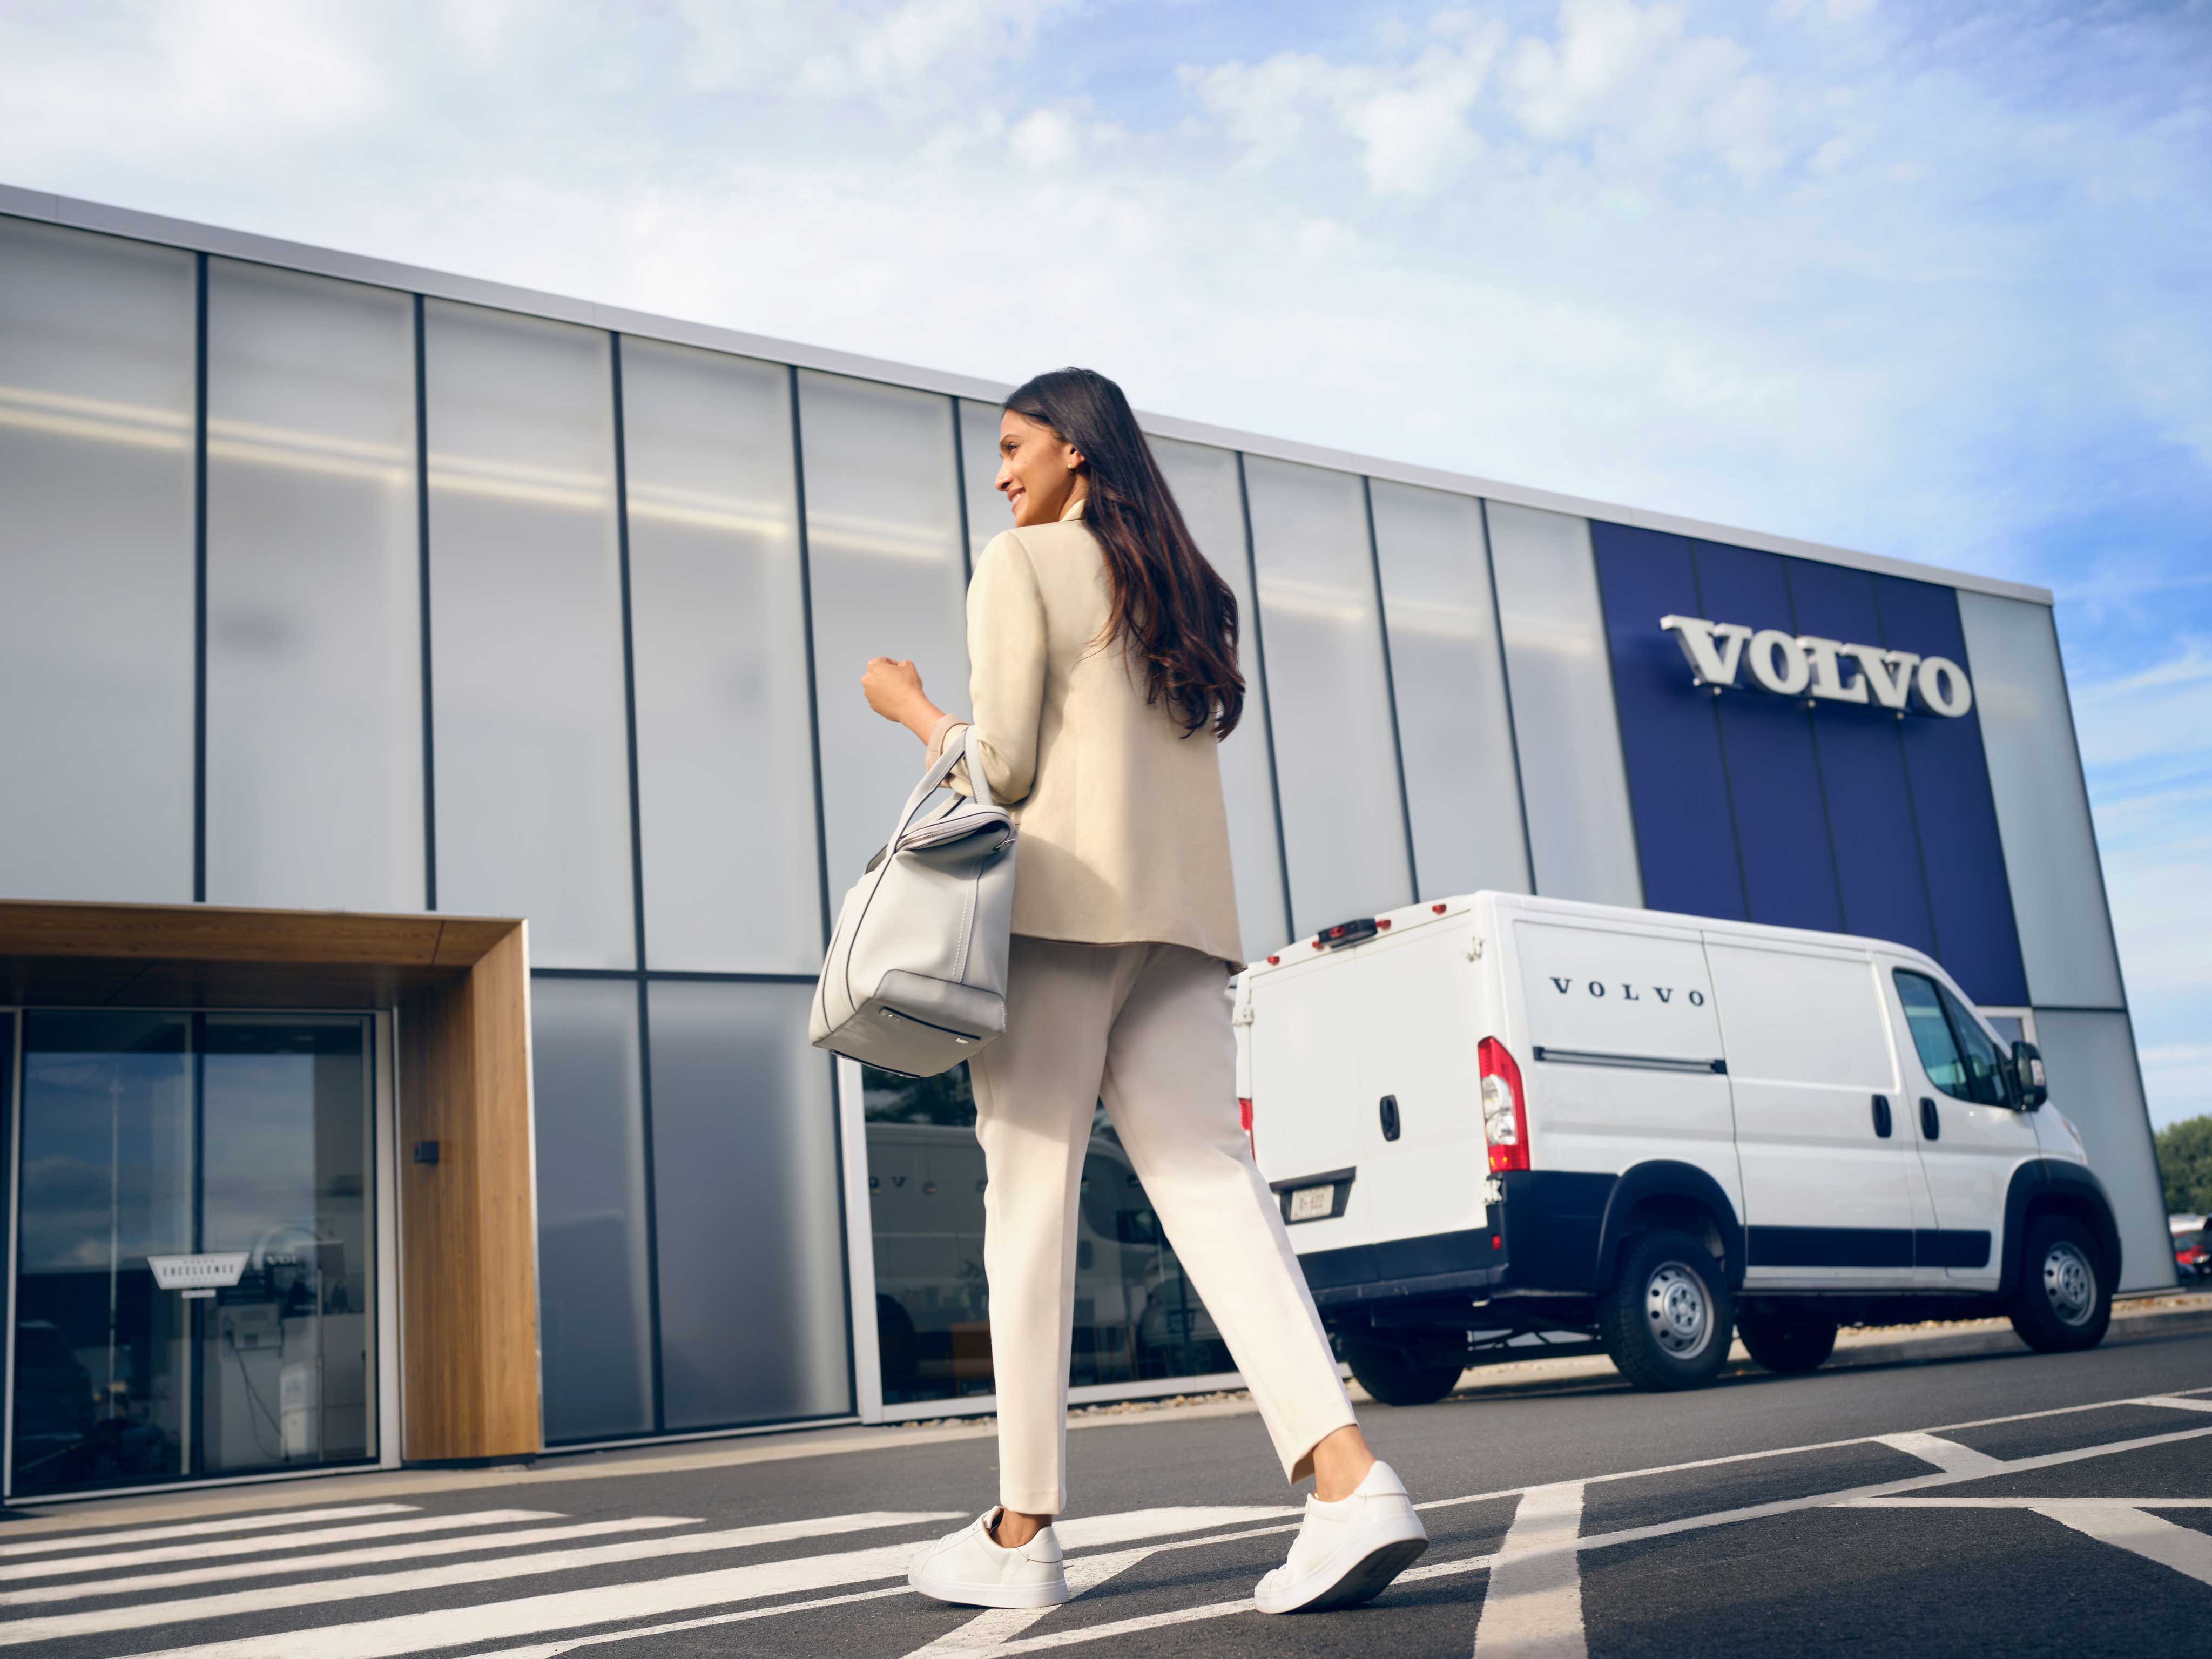 Return your leased vehicle and complete your experience with Volvo Cars and Volvo Car Financial Services